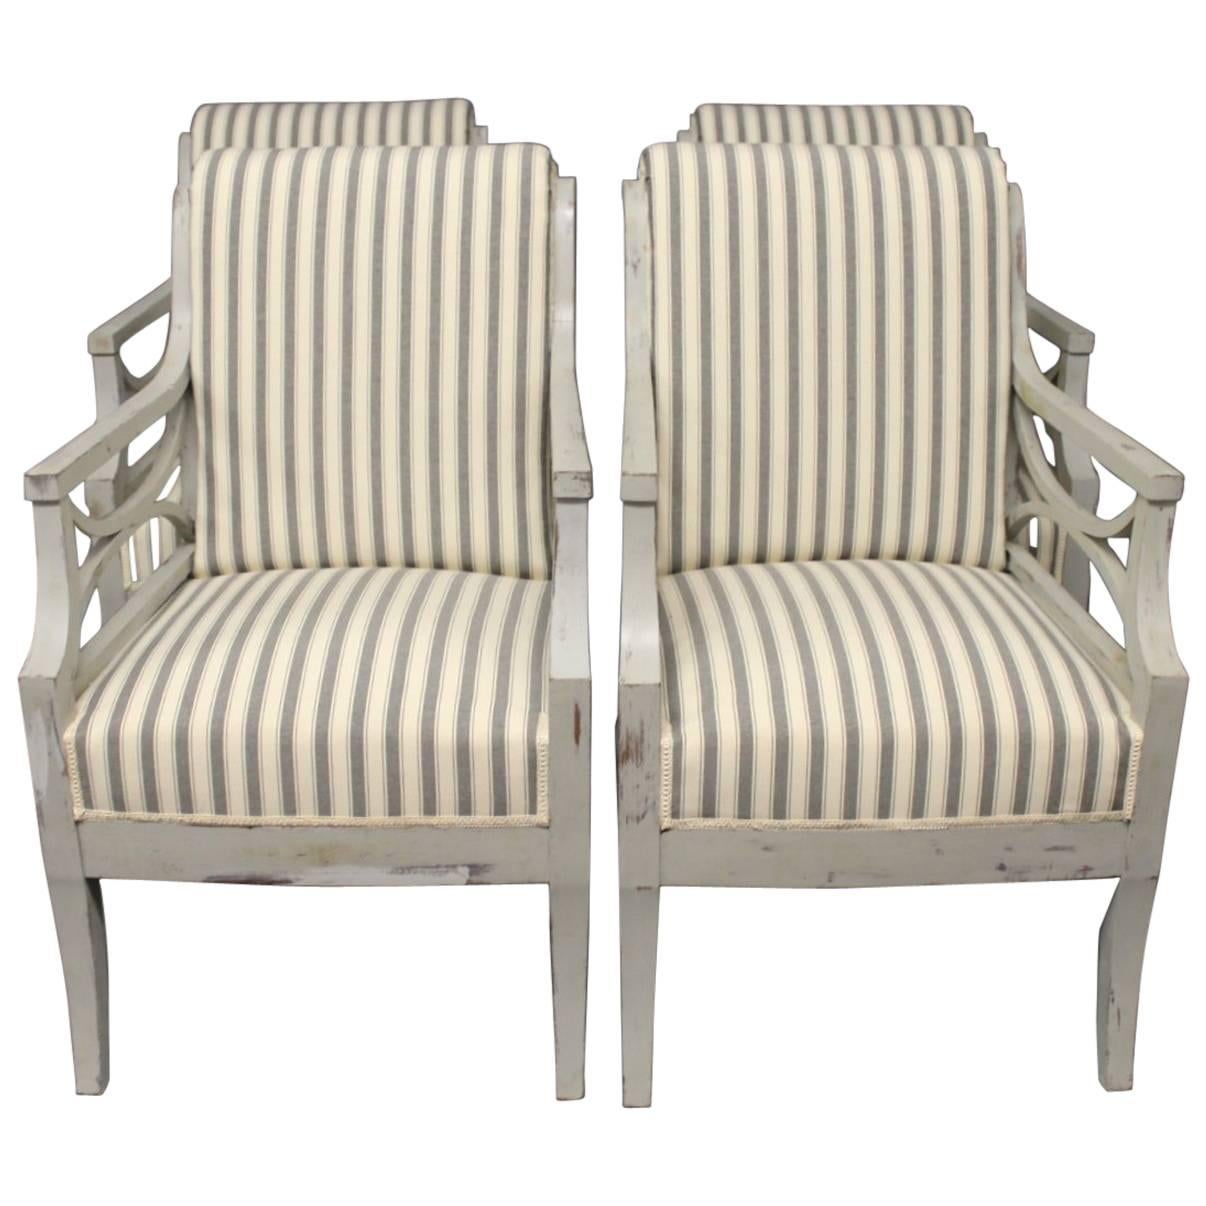 The set of two Gustavian armchairs from circa 1810 appear with a beautiful patina that adds character and history to their appearance. The chairs are made of gray painted wood, which gives them a timeless and elegant look, typical of the style of